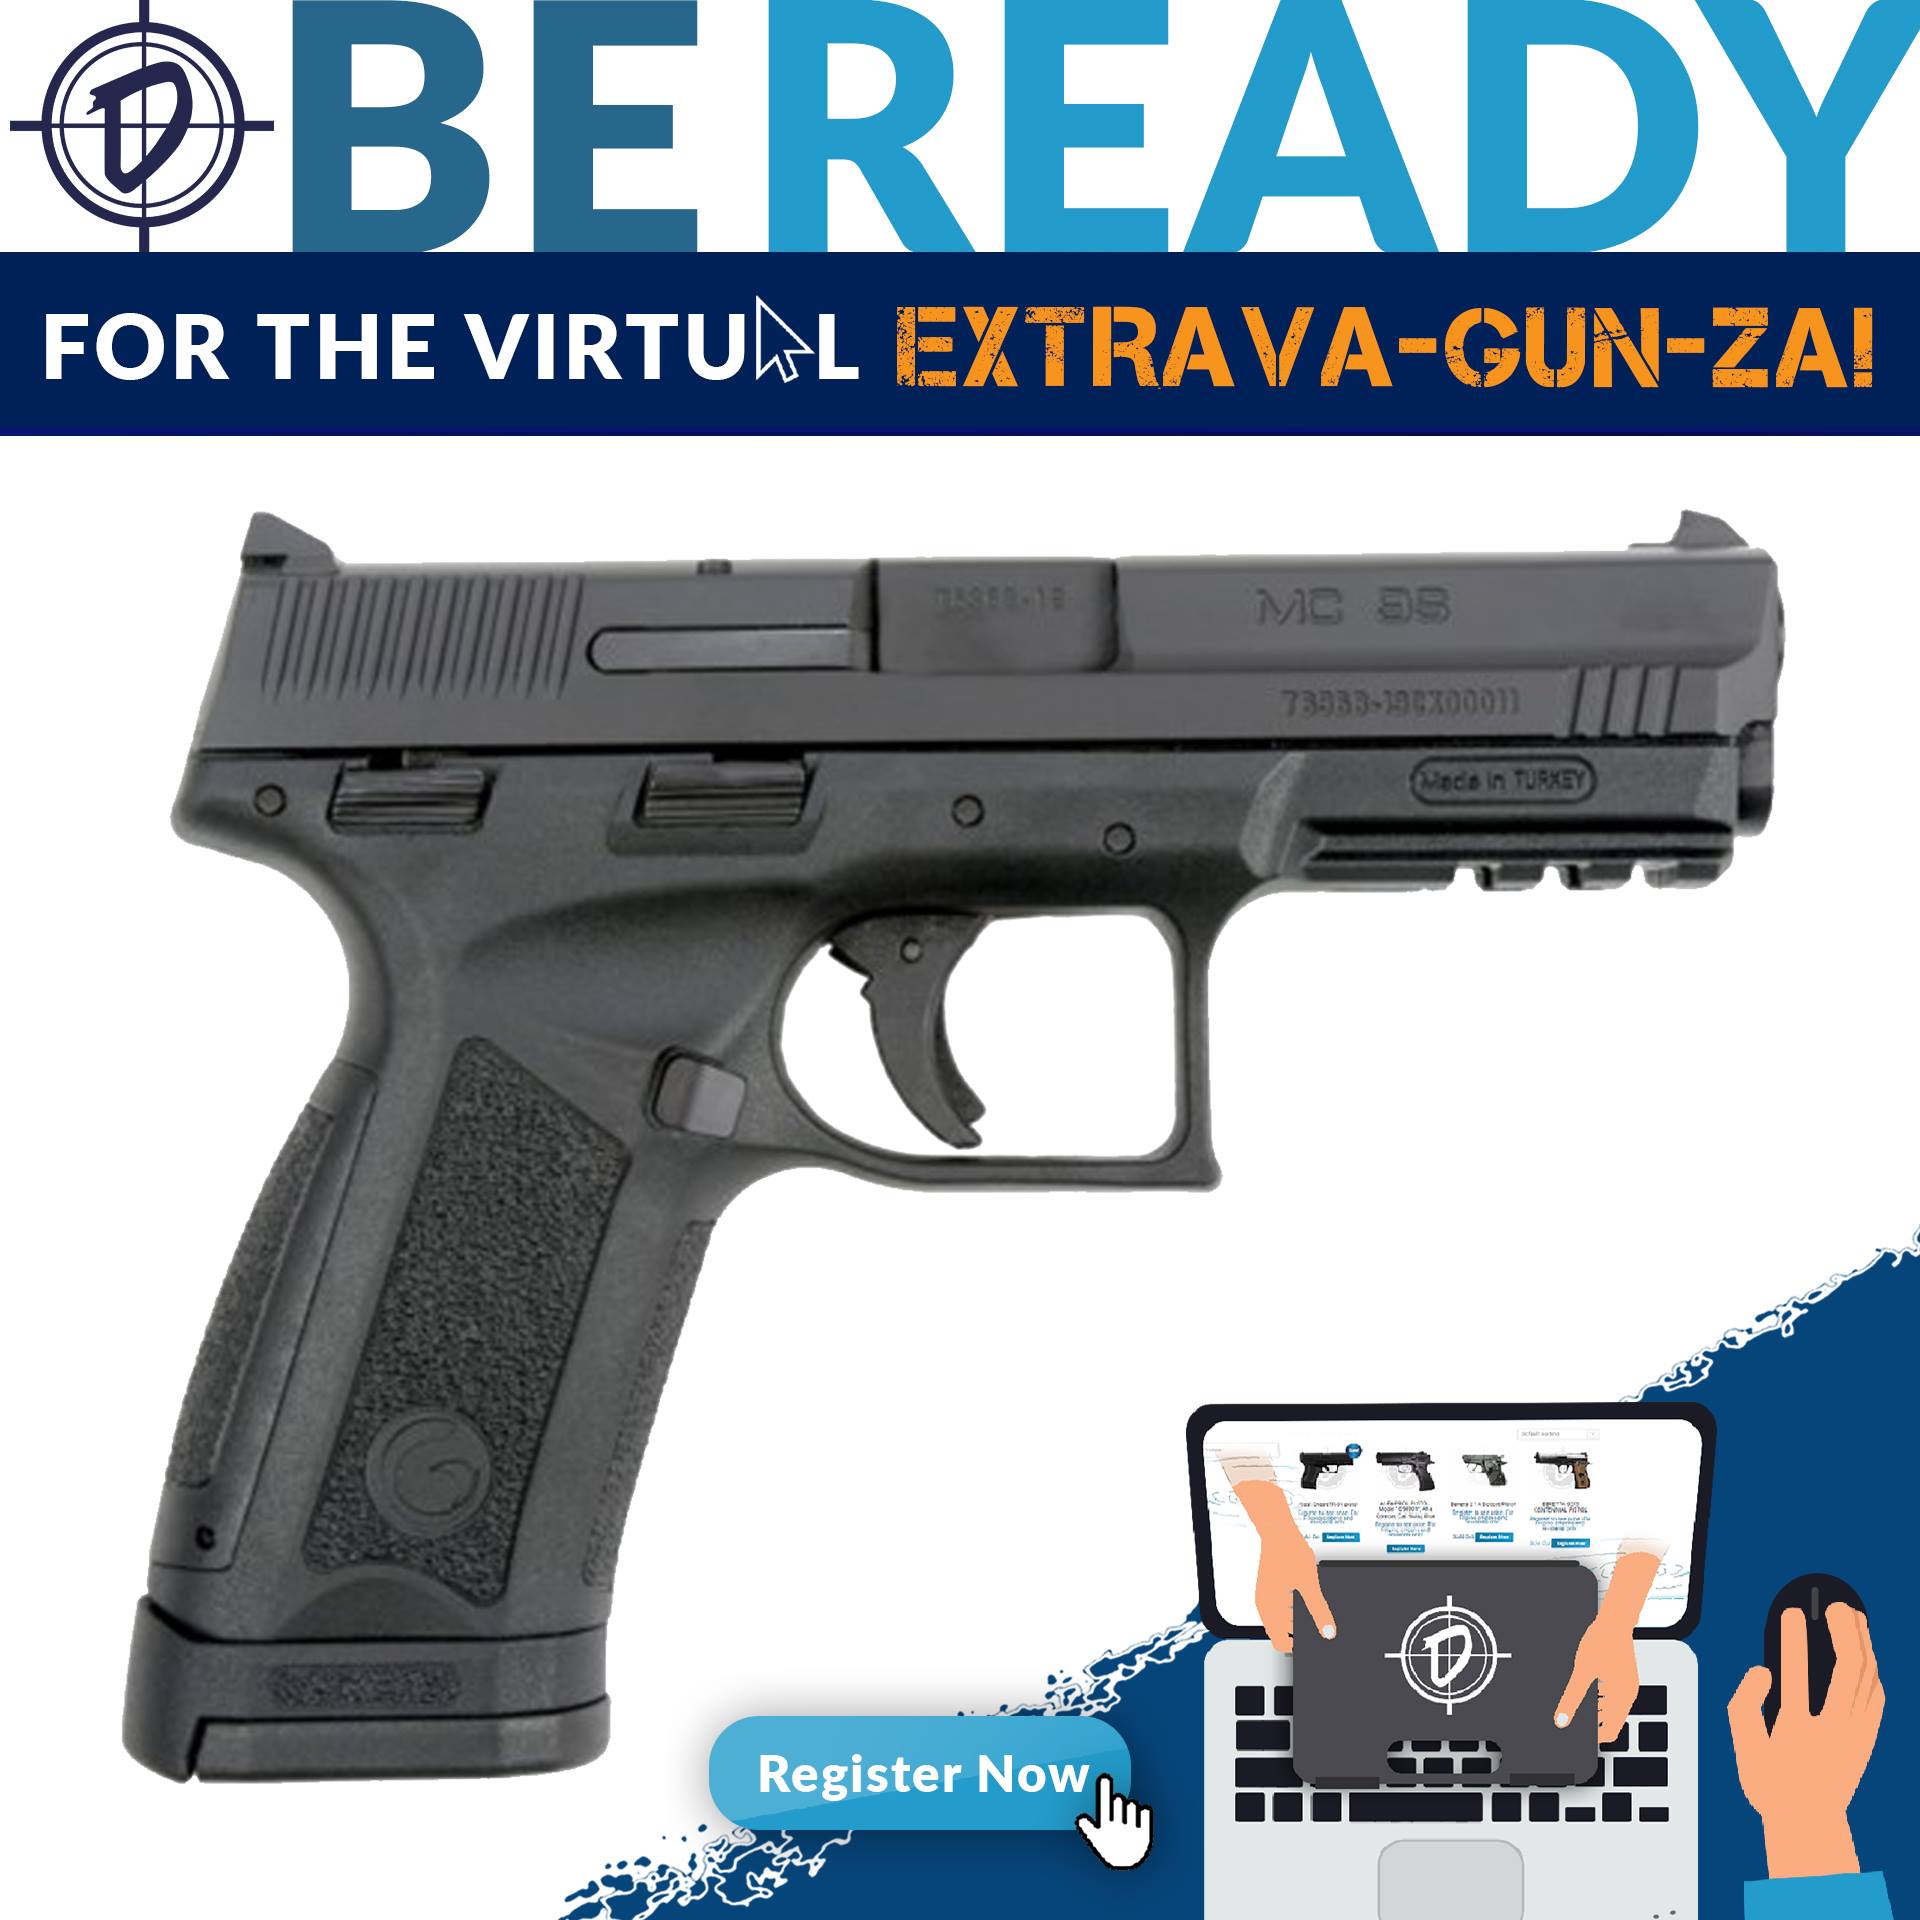 Are you ready for P.B.Dionisio & Co.'s Virtual Extrava-Gun-Za Event! From July 9 to July 13, join us for an online event. We're going through an unprecedented time. Count on P.B.Dionisio & Co. to help you be ready to defend, to protect and to win. 